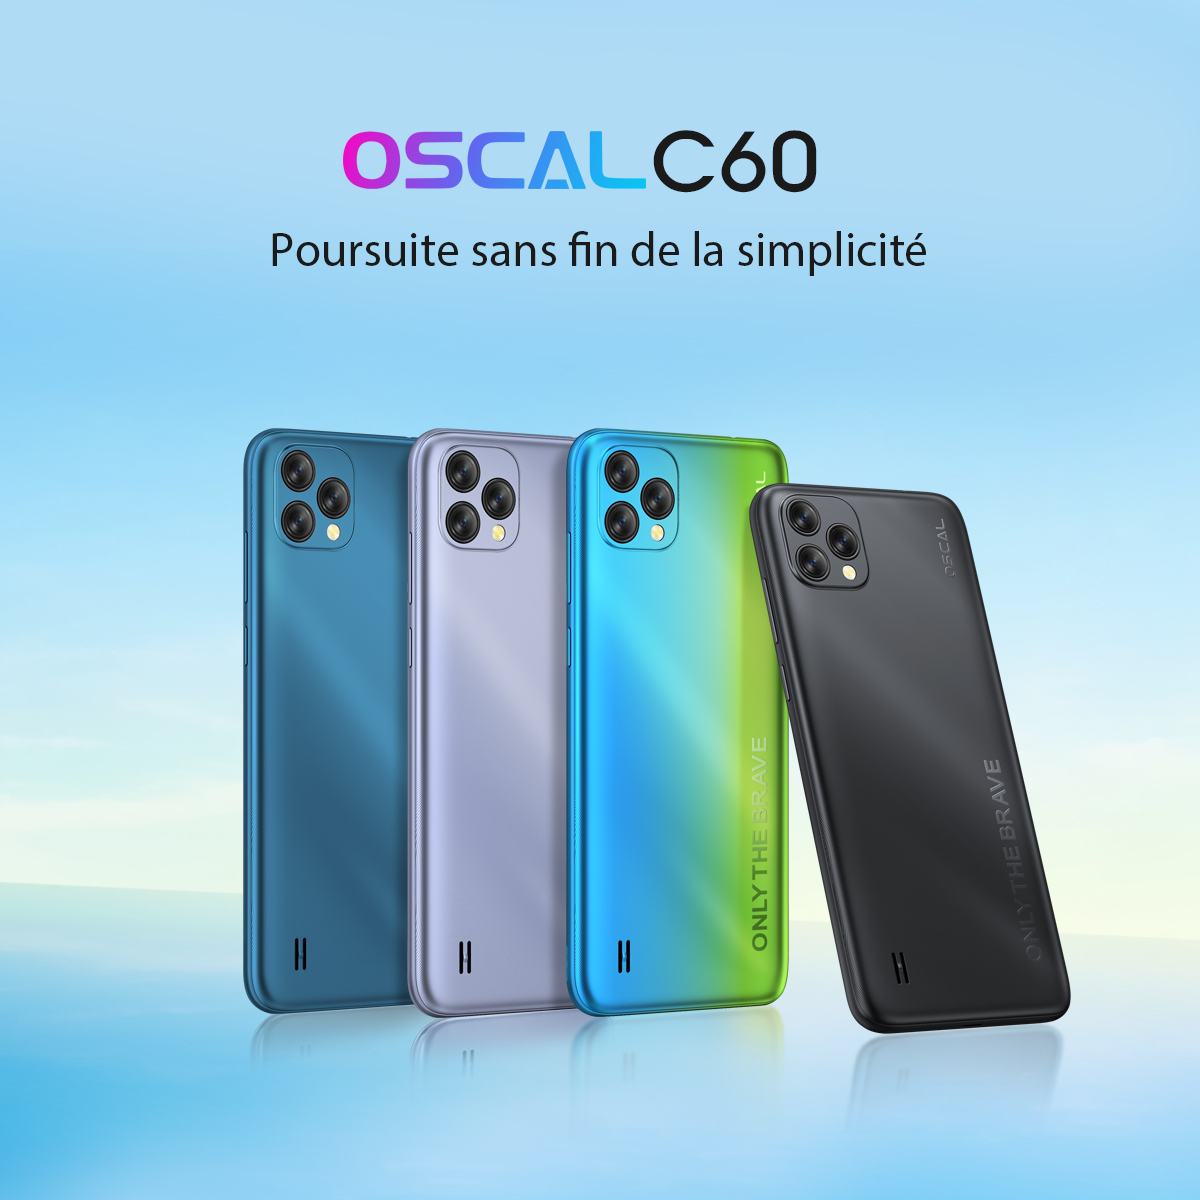 OSCAL Telephone Portable, C60 Smartphone Pas Cher Android 11, 4GO+